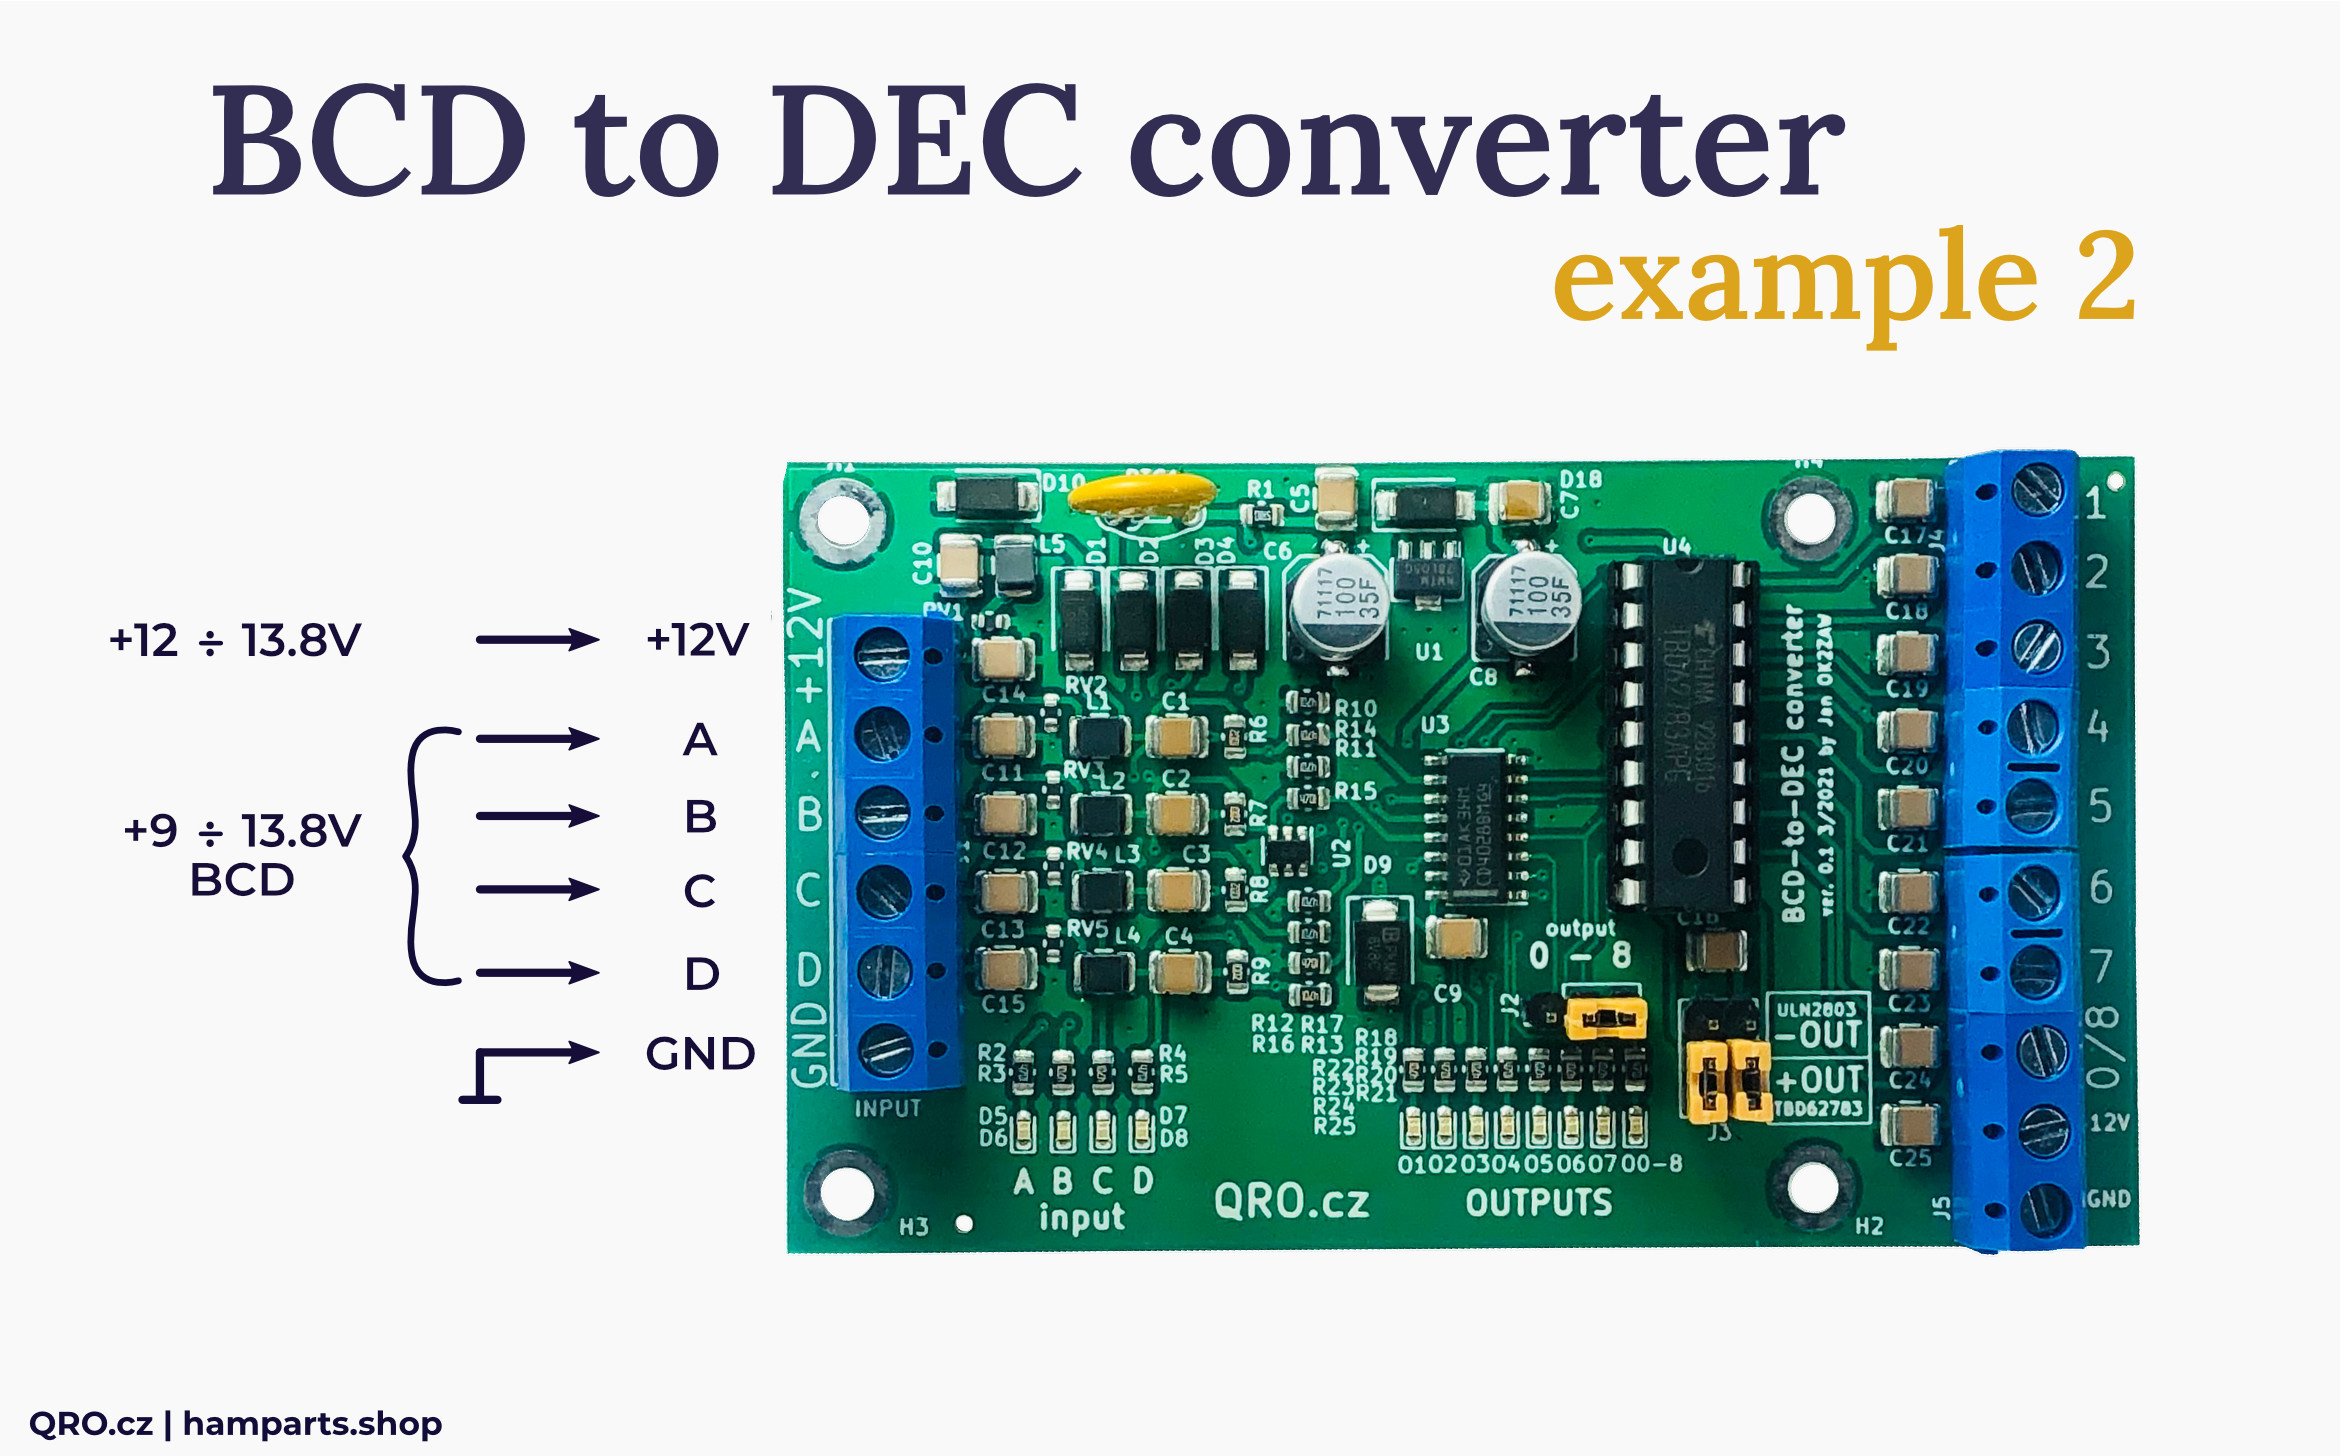 BCD to DEC converter connection example by qro.cz hamparts.shop